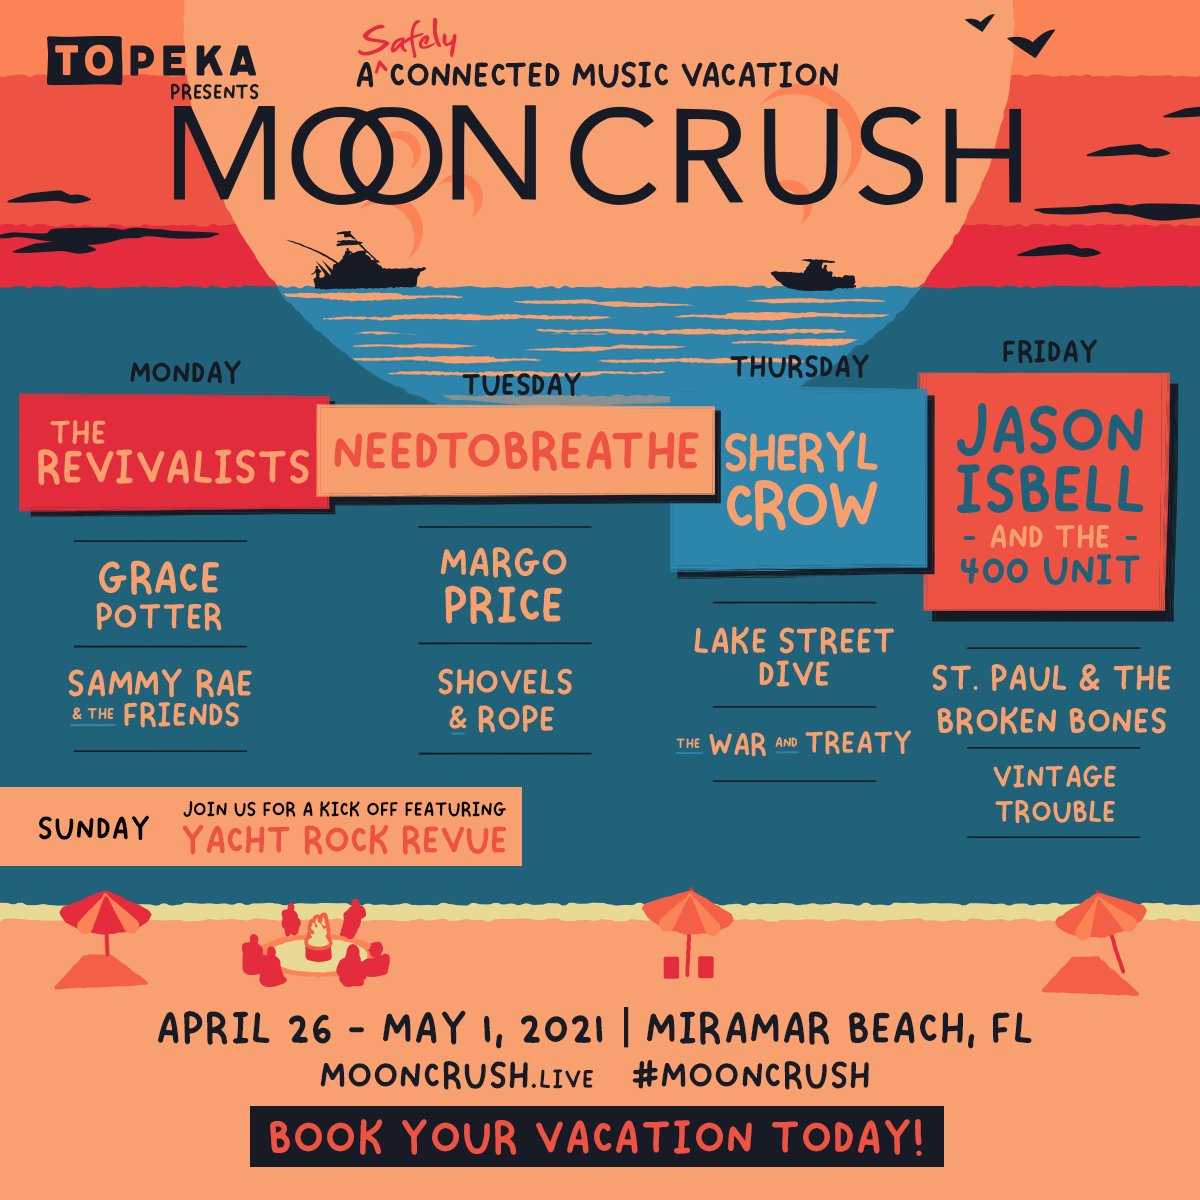 Just 2️⃣ months to go, Moon Crushers! Our safely connected music vacation will be here before you know it! Join us April 26 - May 1 in Miramar Beach with @JasonIsbell and The 400 Unit, @SherylCrow @therevivalists @NEEDTOBREATHE @lakestreetdive and more! ow.ly/3vuy50DBRPj